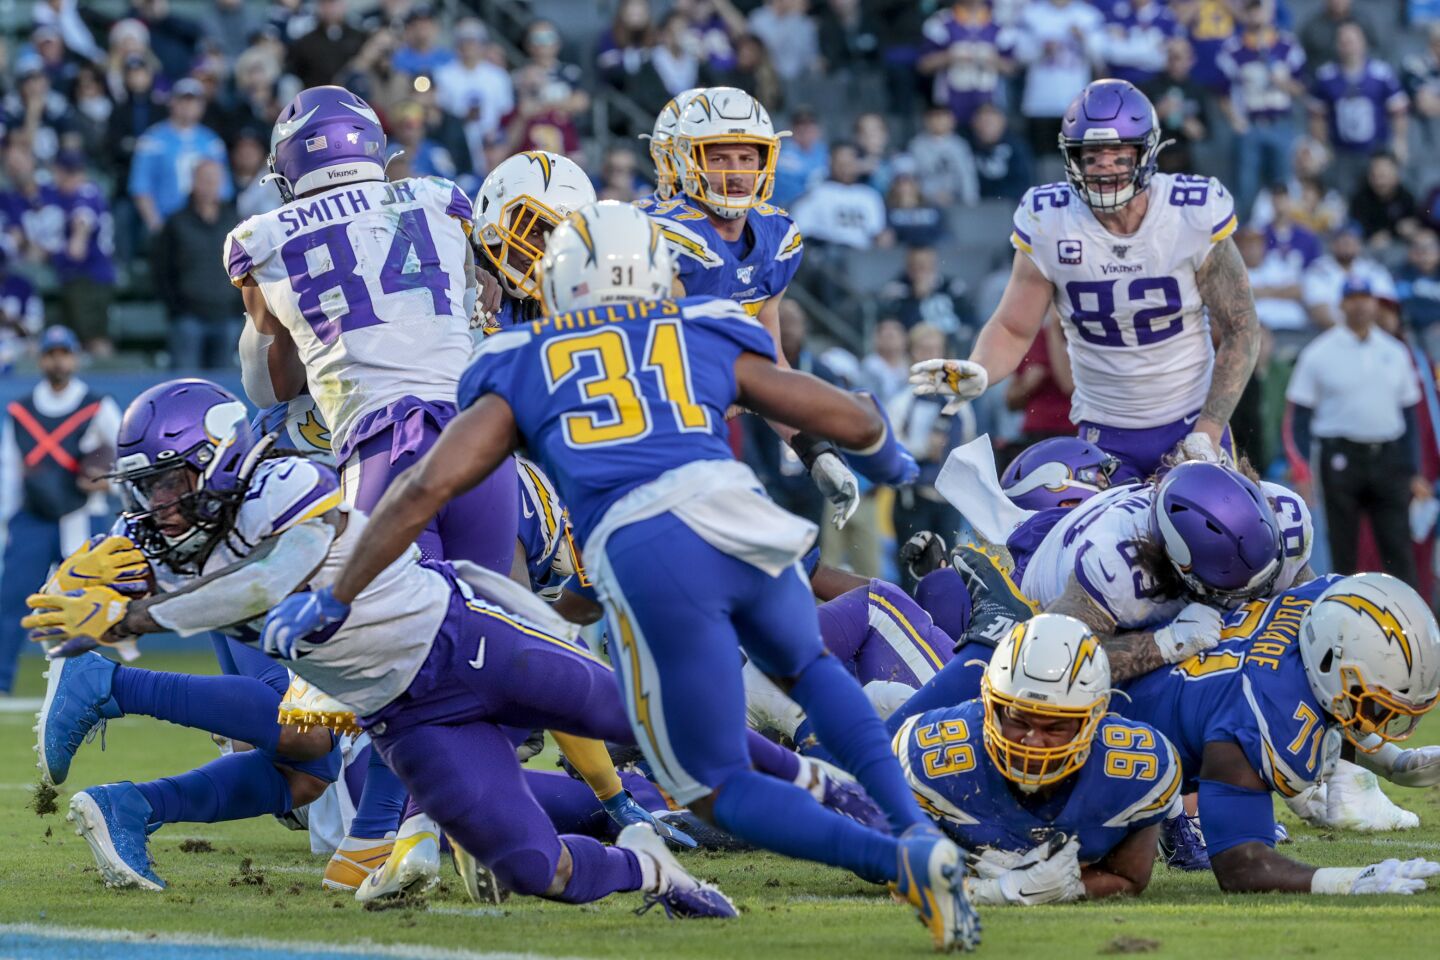 Minnesota Vikings running back Mike Boone dives into the end zone for a two-yard touchdown late in the game.